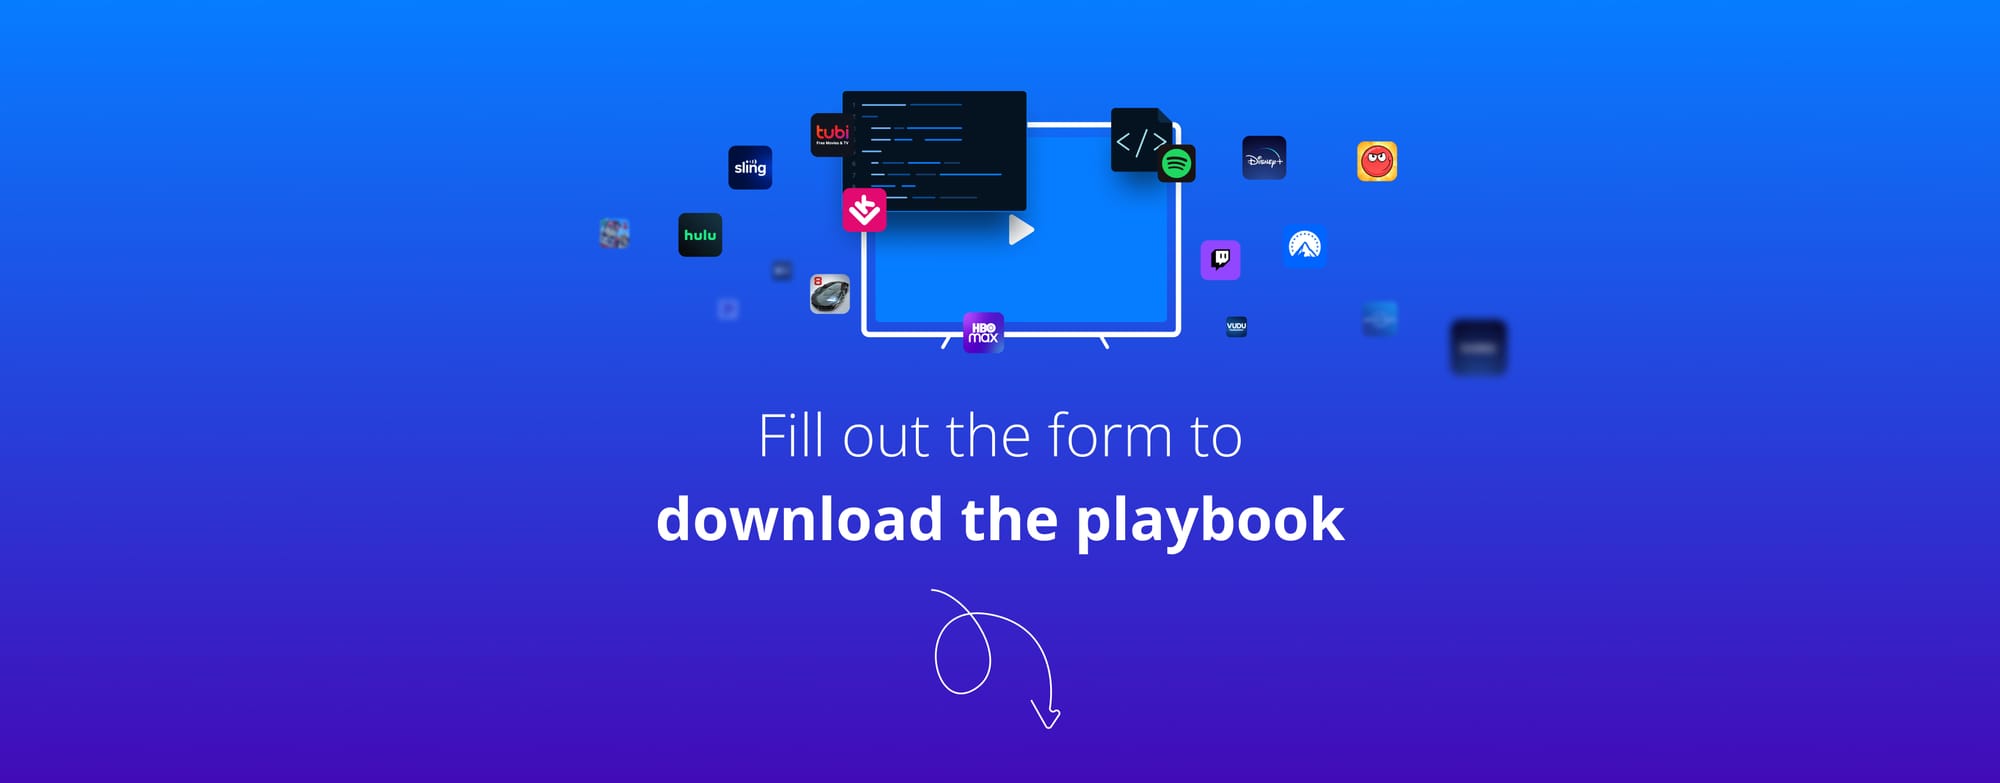 PLAYBOOK: How to Increase Your Connected TV App Inventory